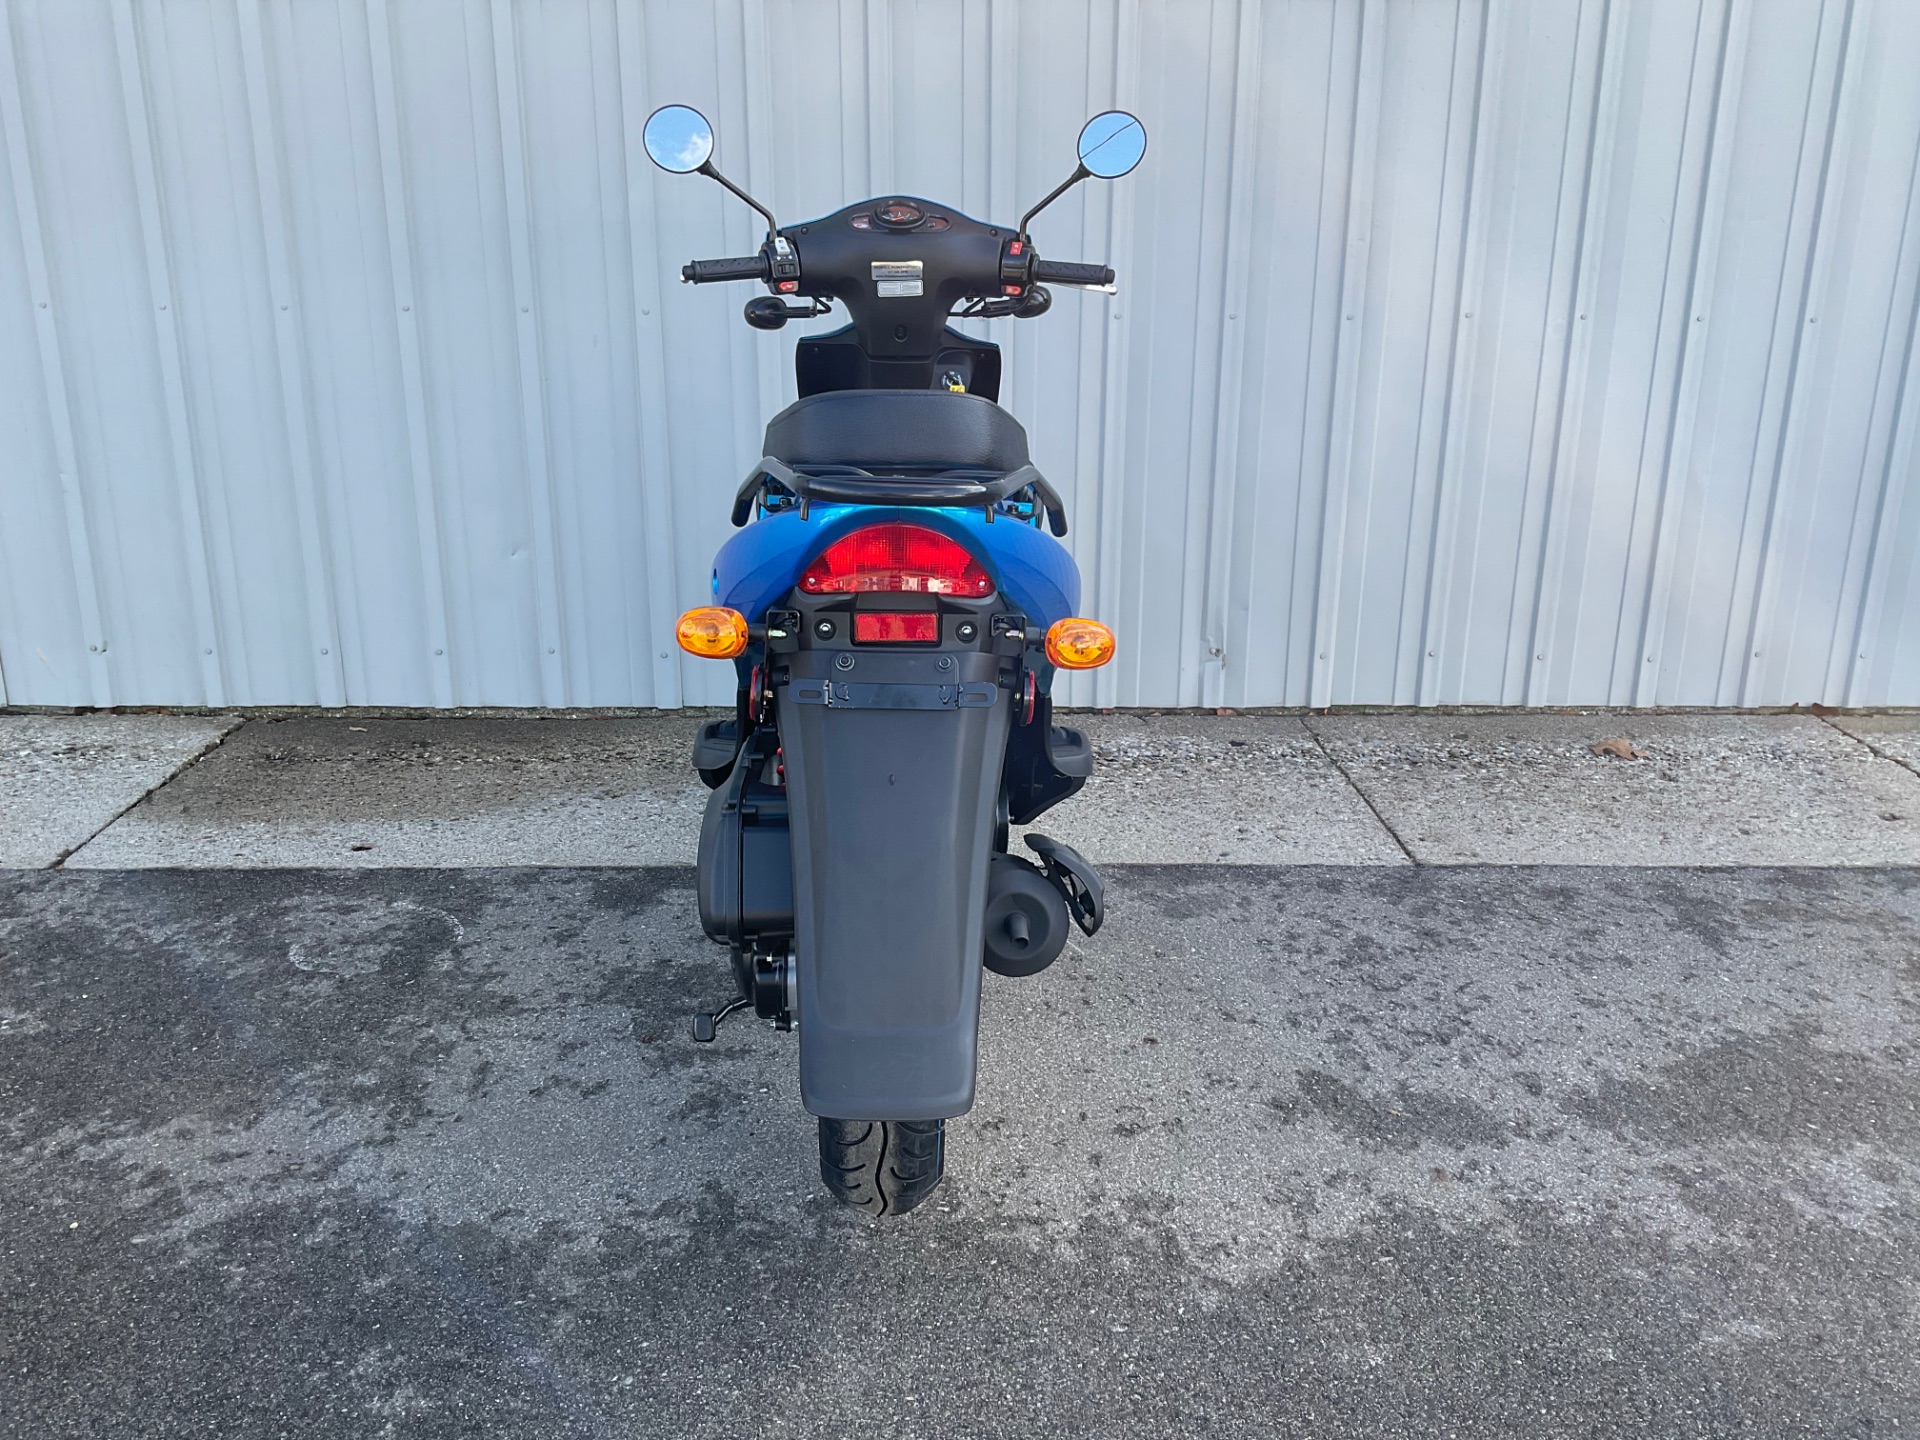 2023 Kymco Agility 50 in Howell, Michigan - Photo 7